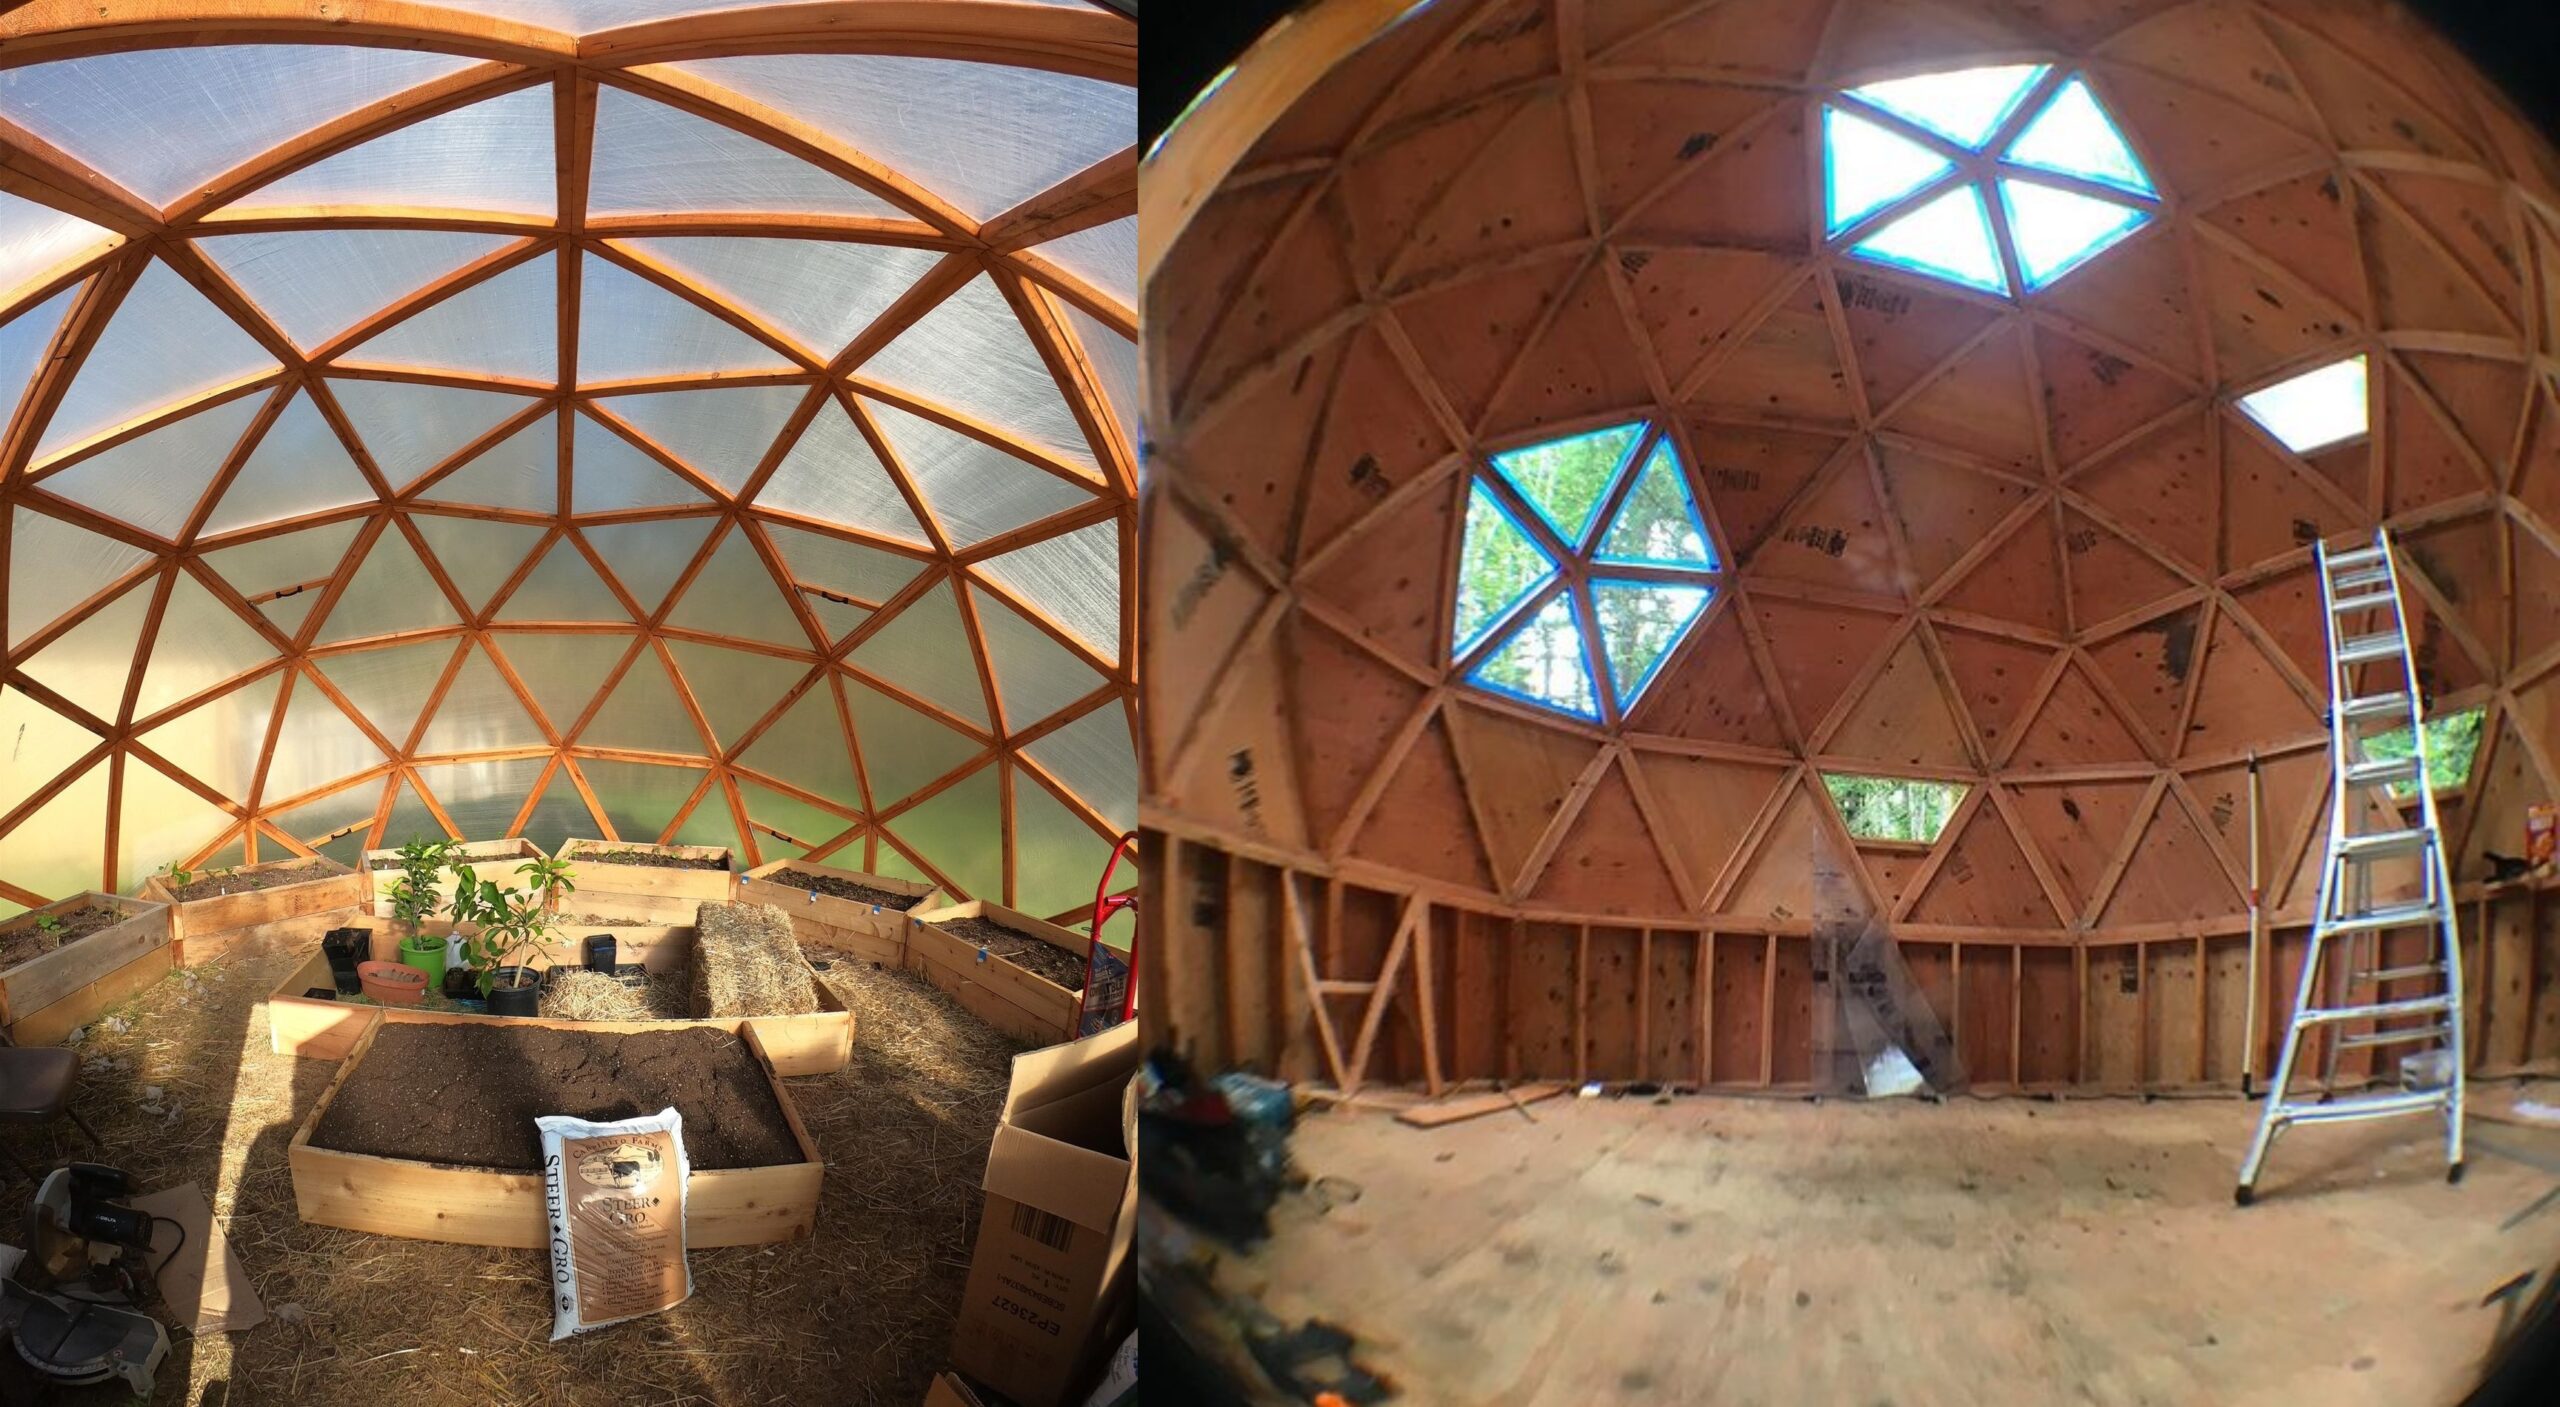 How To Build DIY Geodesic Dome Houses - Pro Explains Steps To Get One? 1